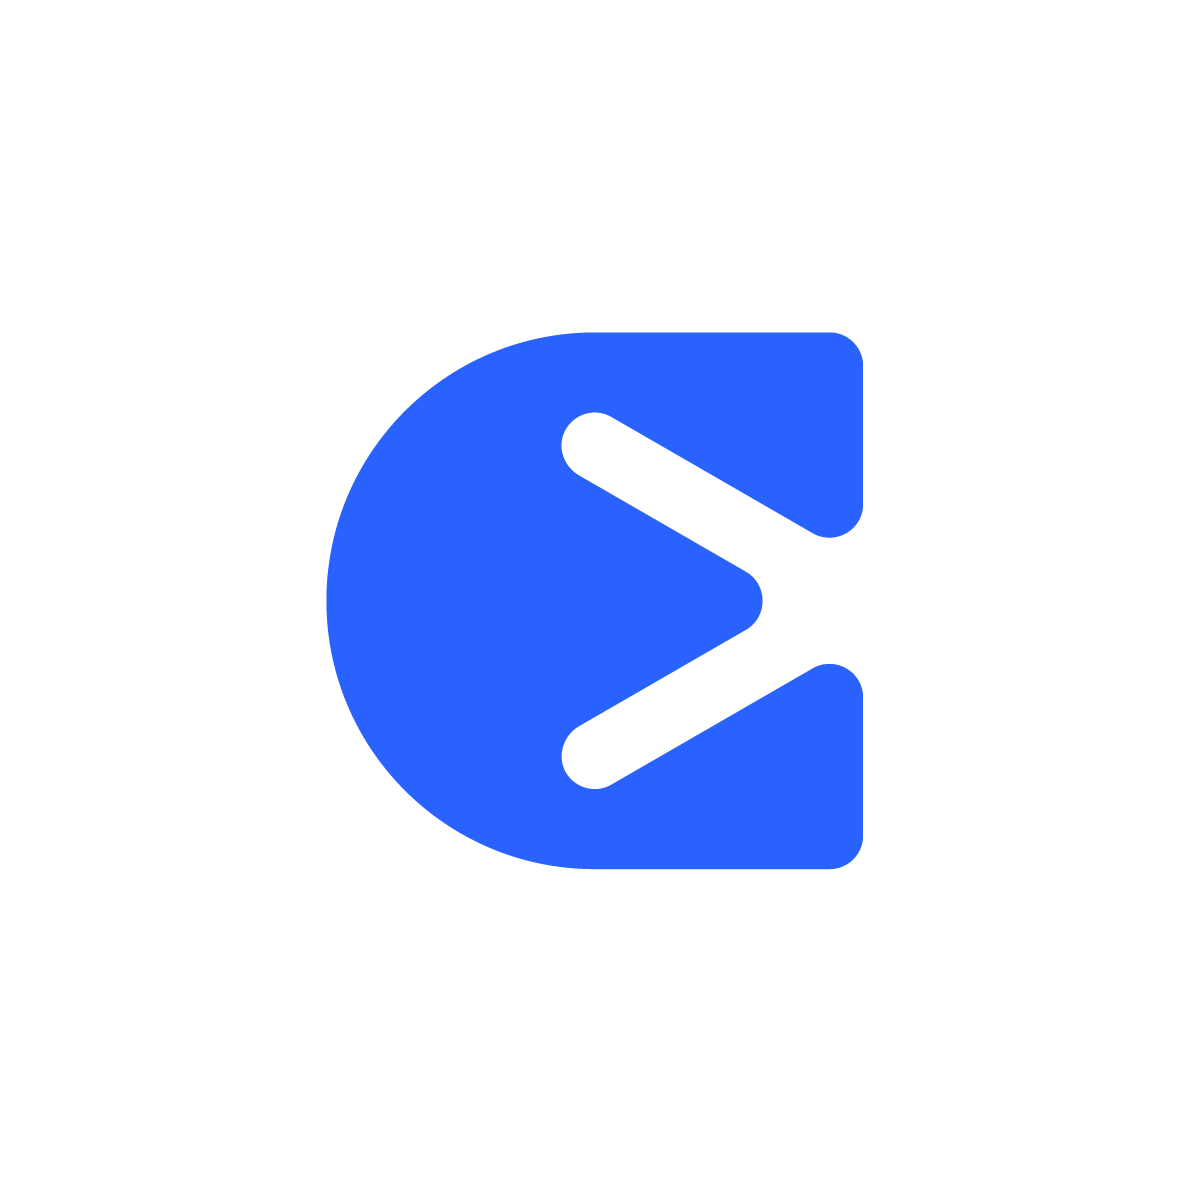 Letter E Logo: Precision meets elegance with an arrow in rounded corners. Distinctive, progressive, and stylish.